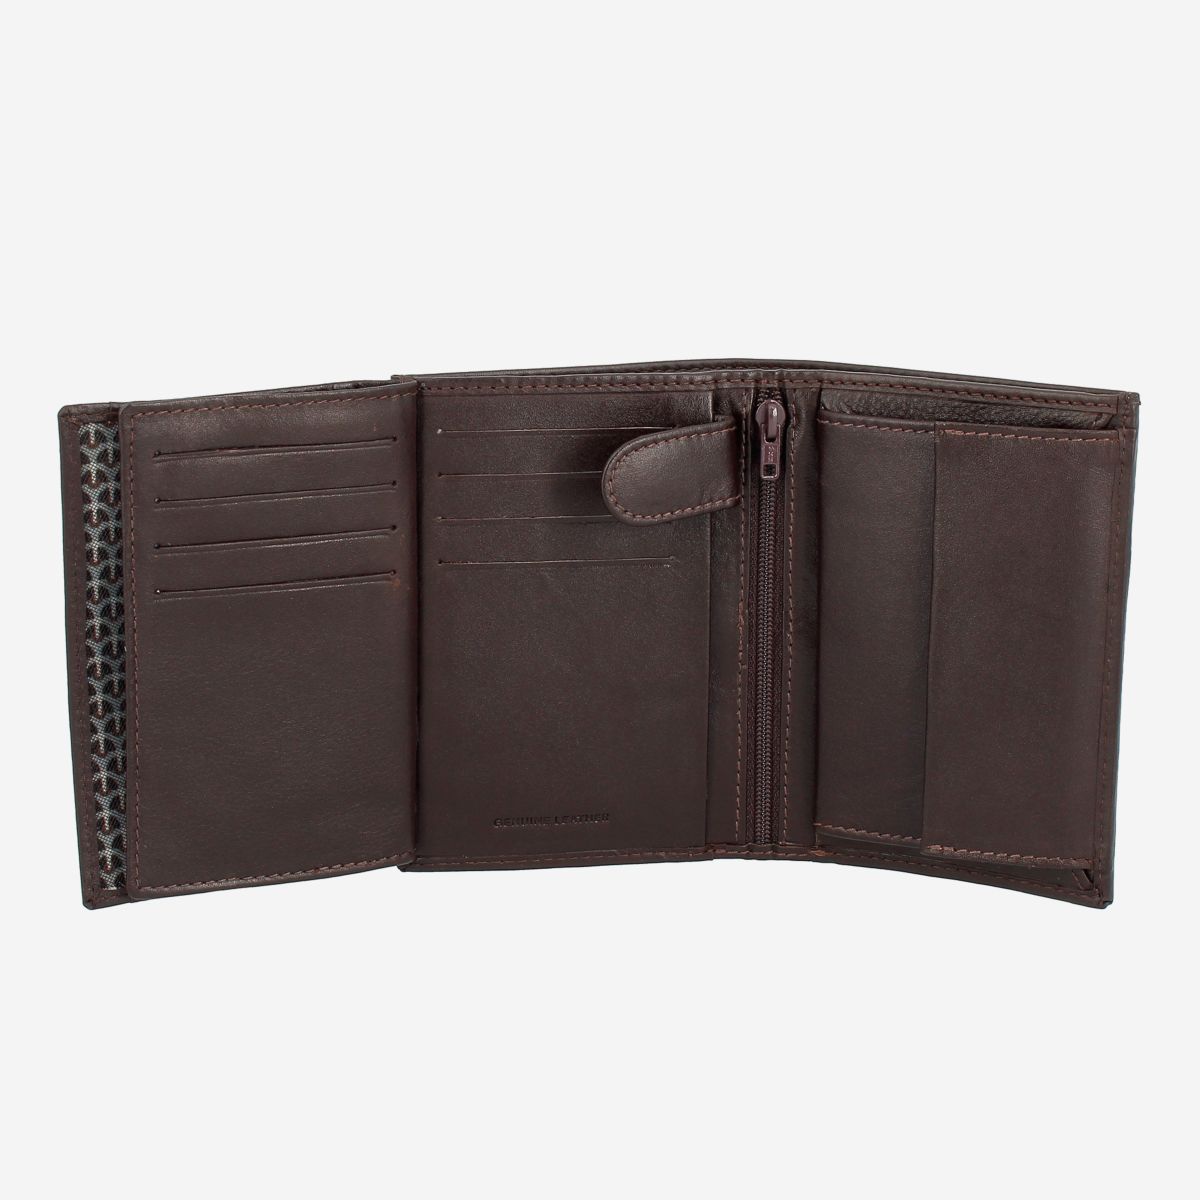 NUVOLA PELLE Mens Vertical Wallet With Coin Pocket - Dark Brown